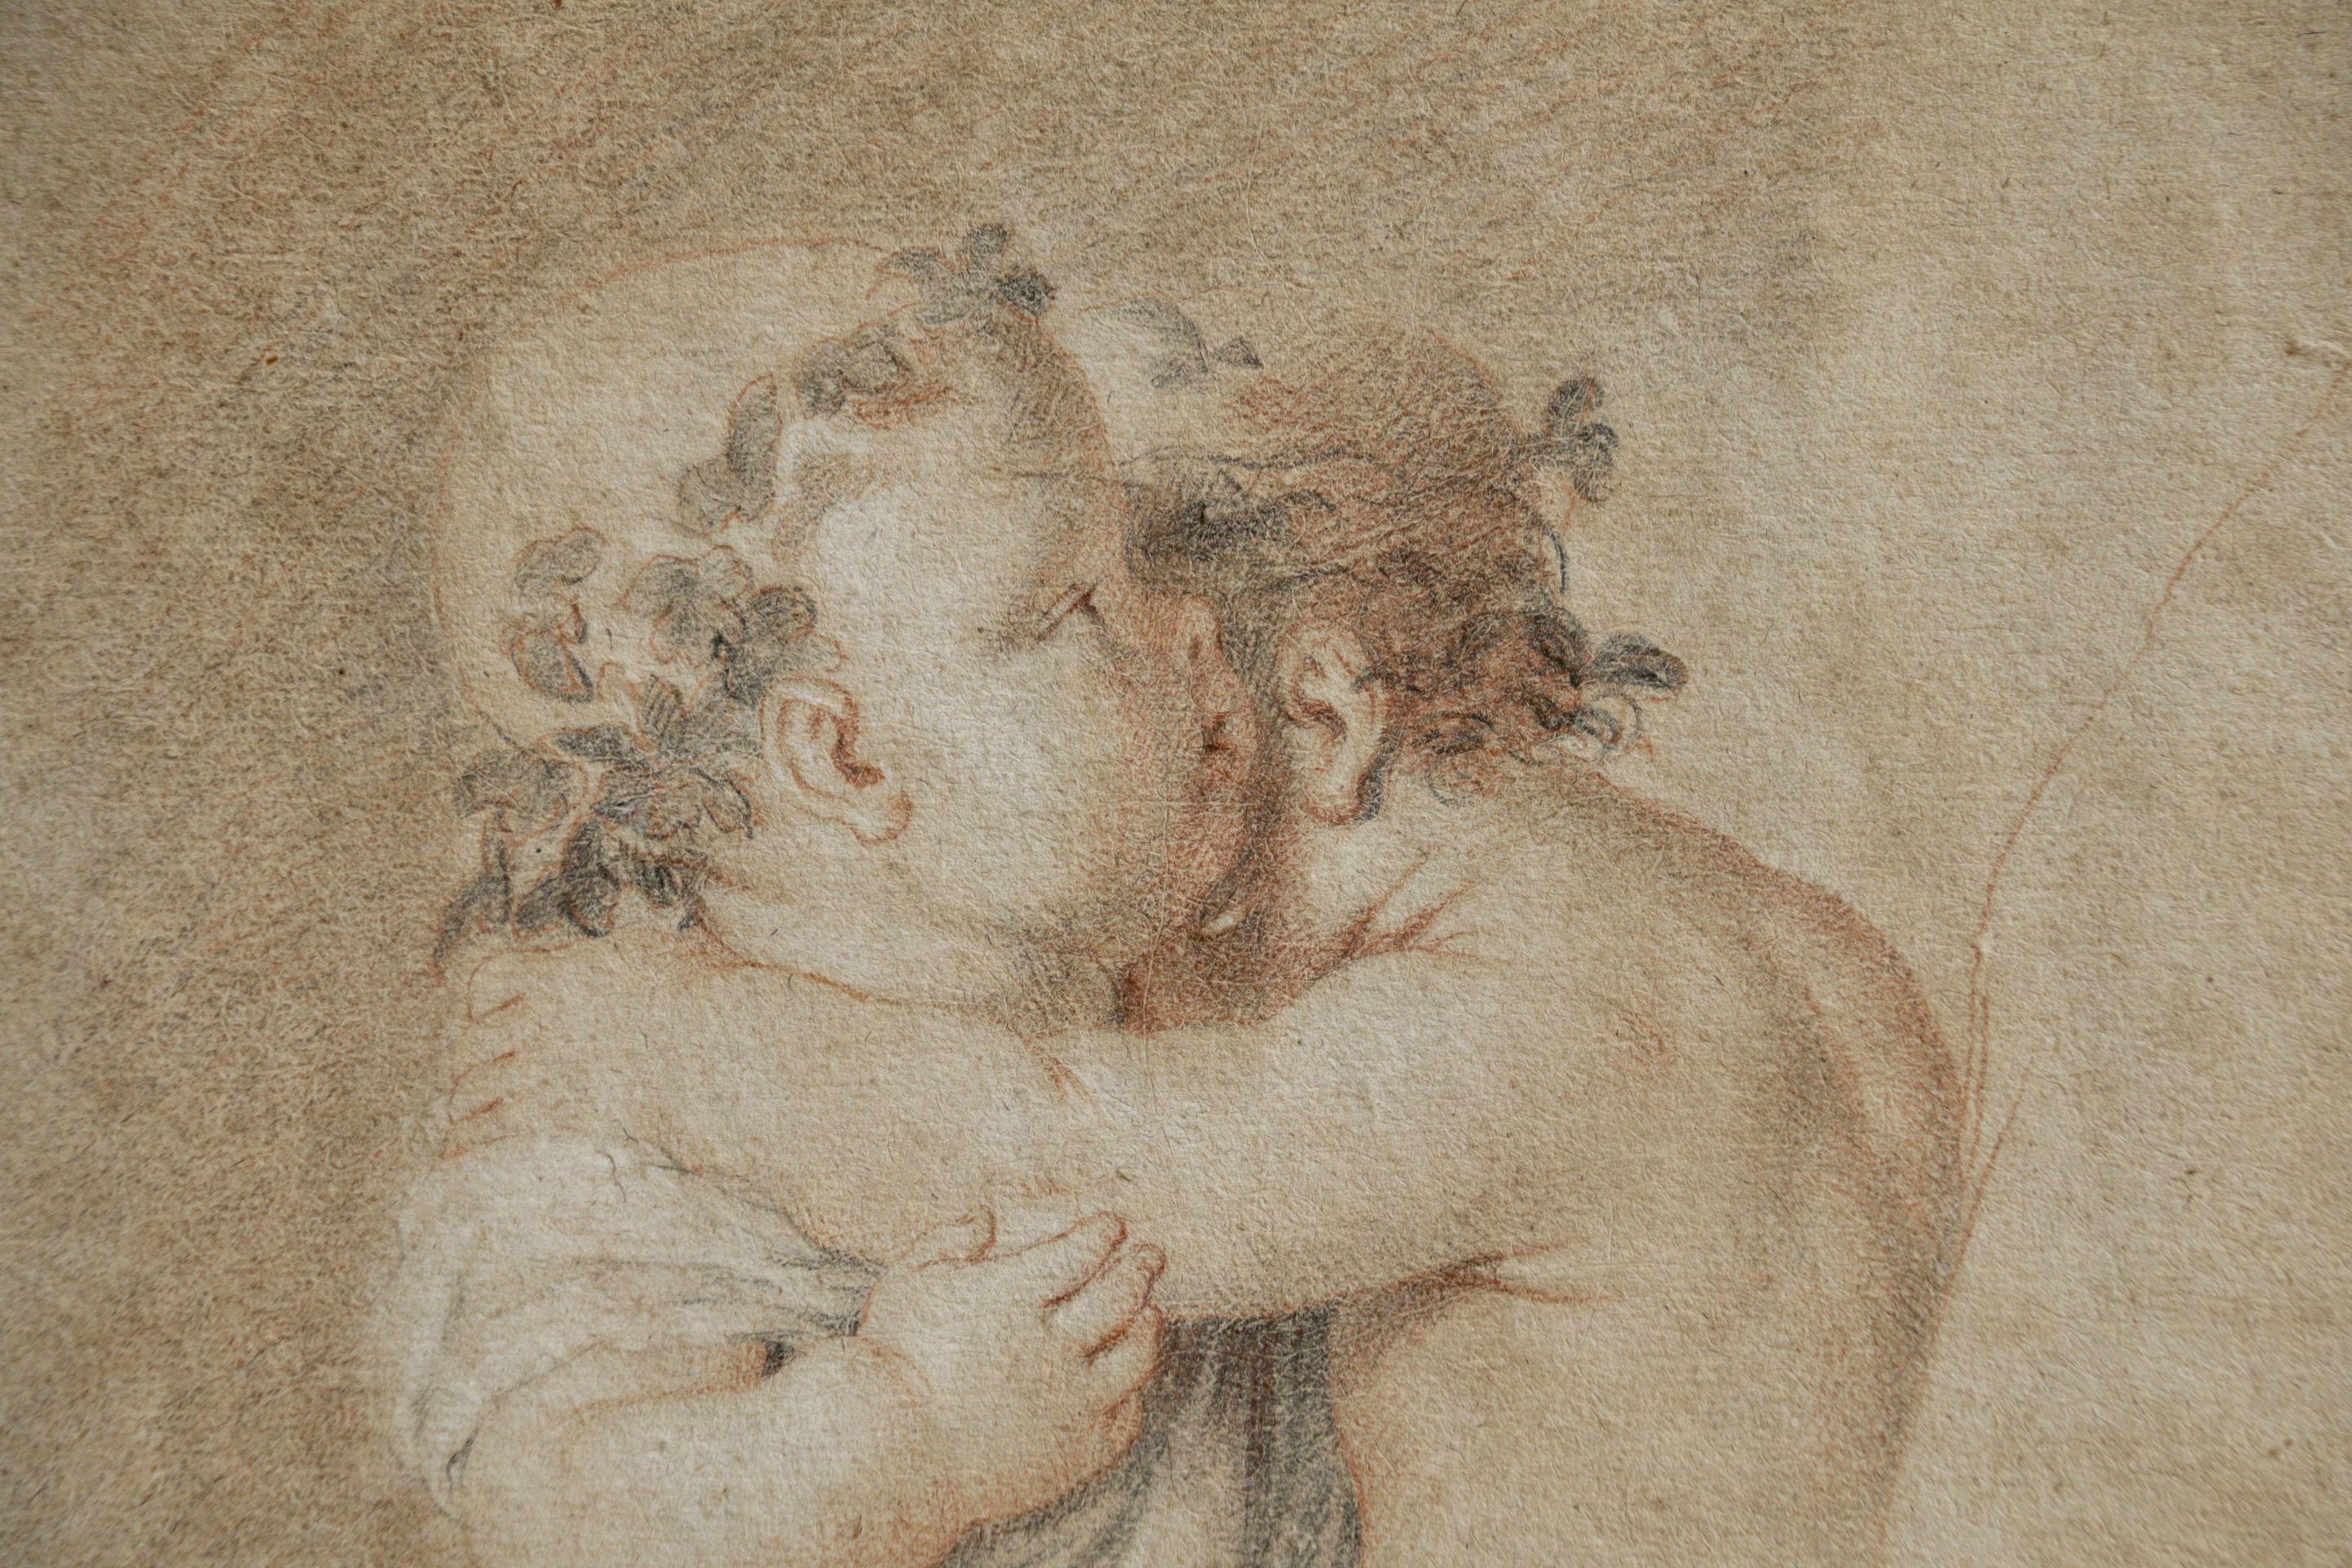 The Infants Christ and Saint John the Baptist Embracing - Painting by (Attributed to) Nicolas Poussin